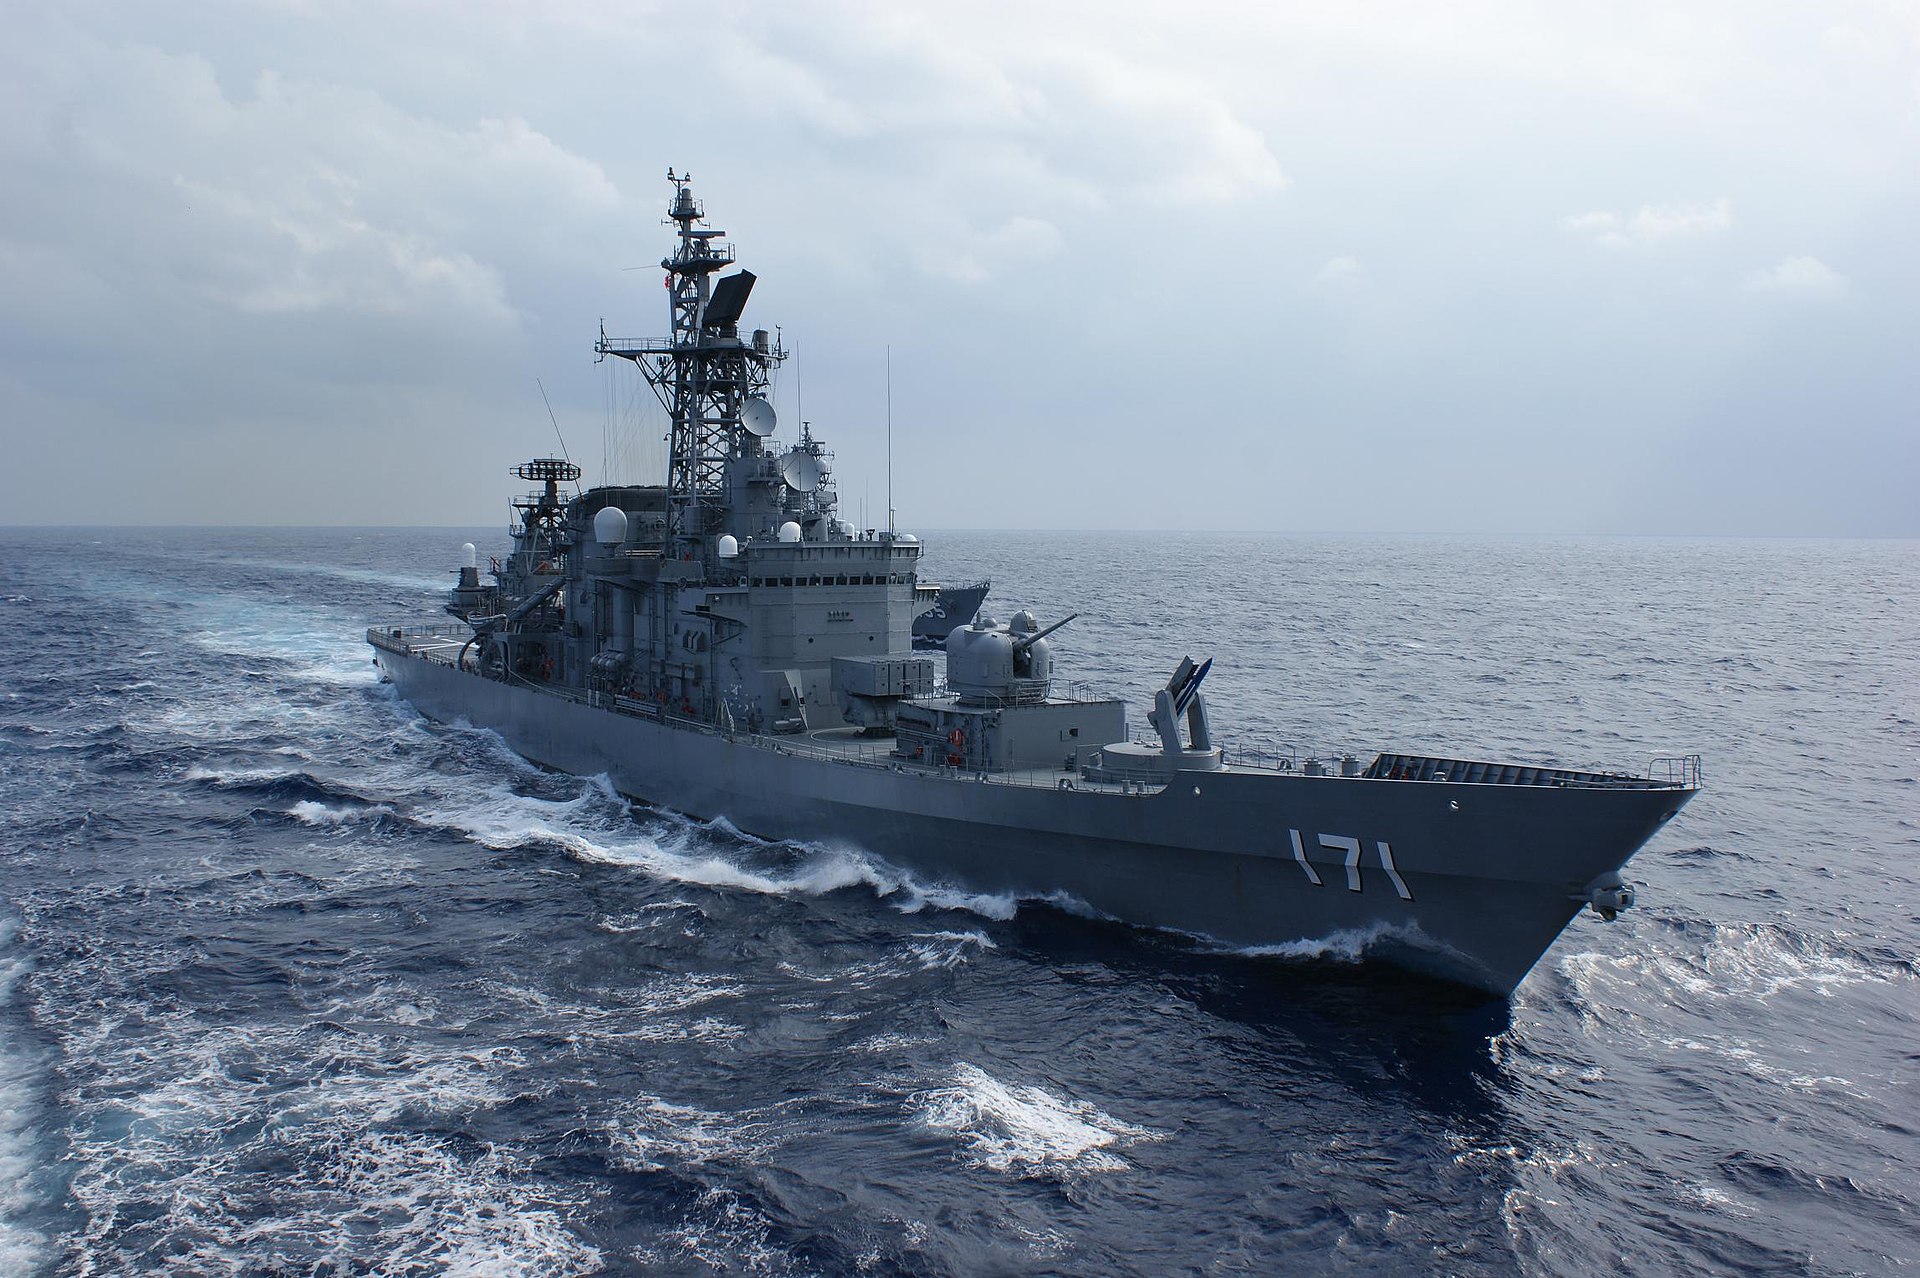 1920px-US_Navy_101206-N-2562W-013_The_Japan_Maritime_Self-Defense_ship_JS_Hatakaze_%28DDG_171%29_is_participating_in_exercise_Keen_Sword_2011.jpg